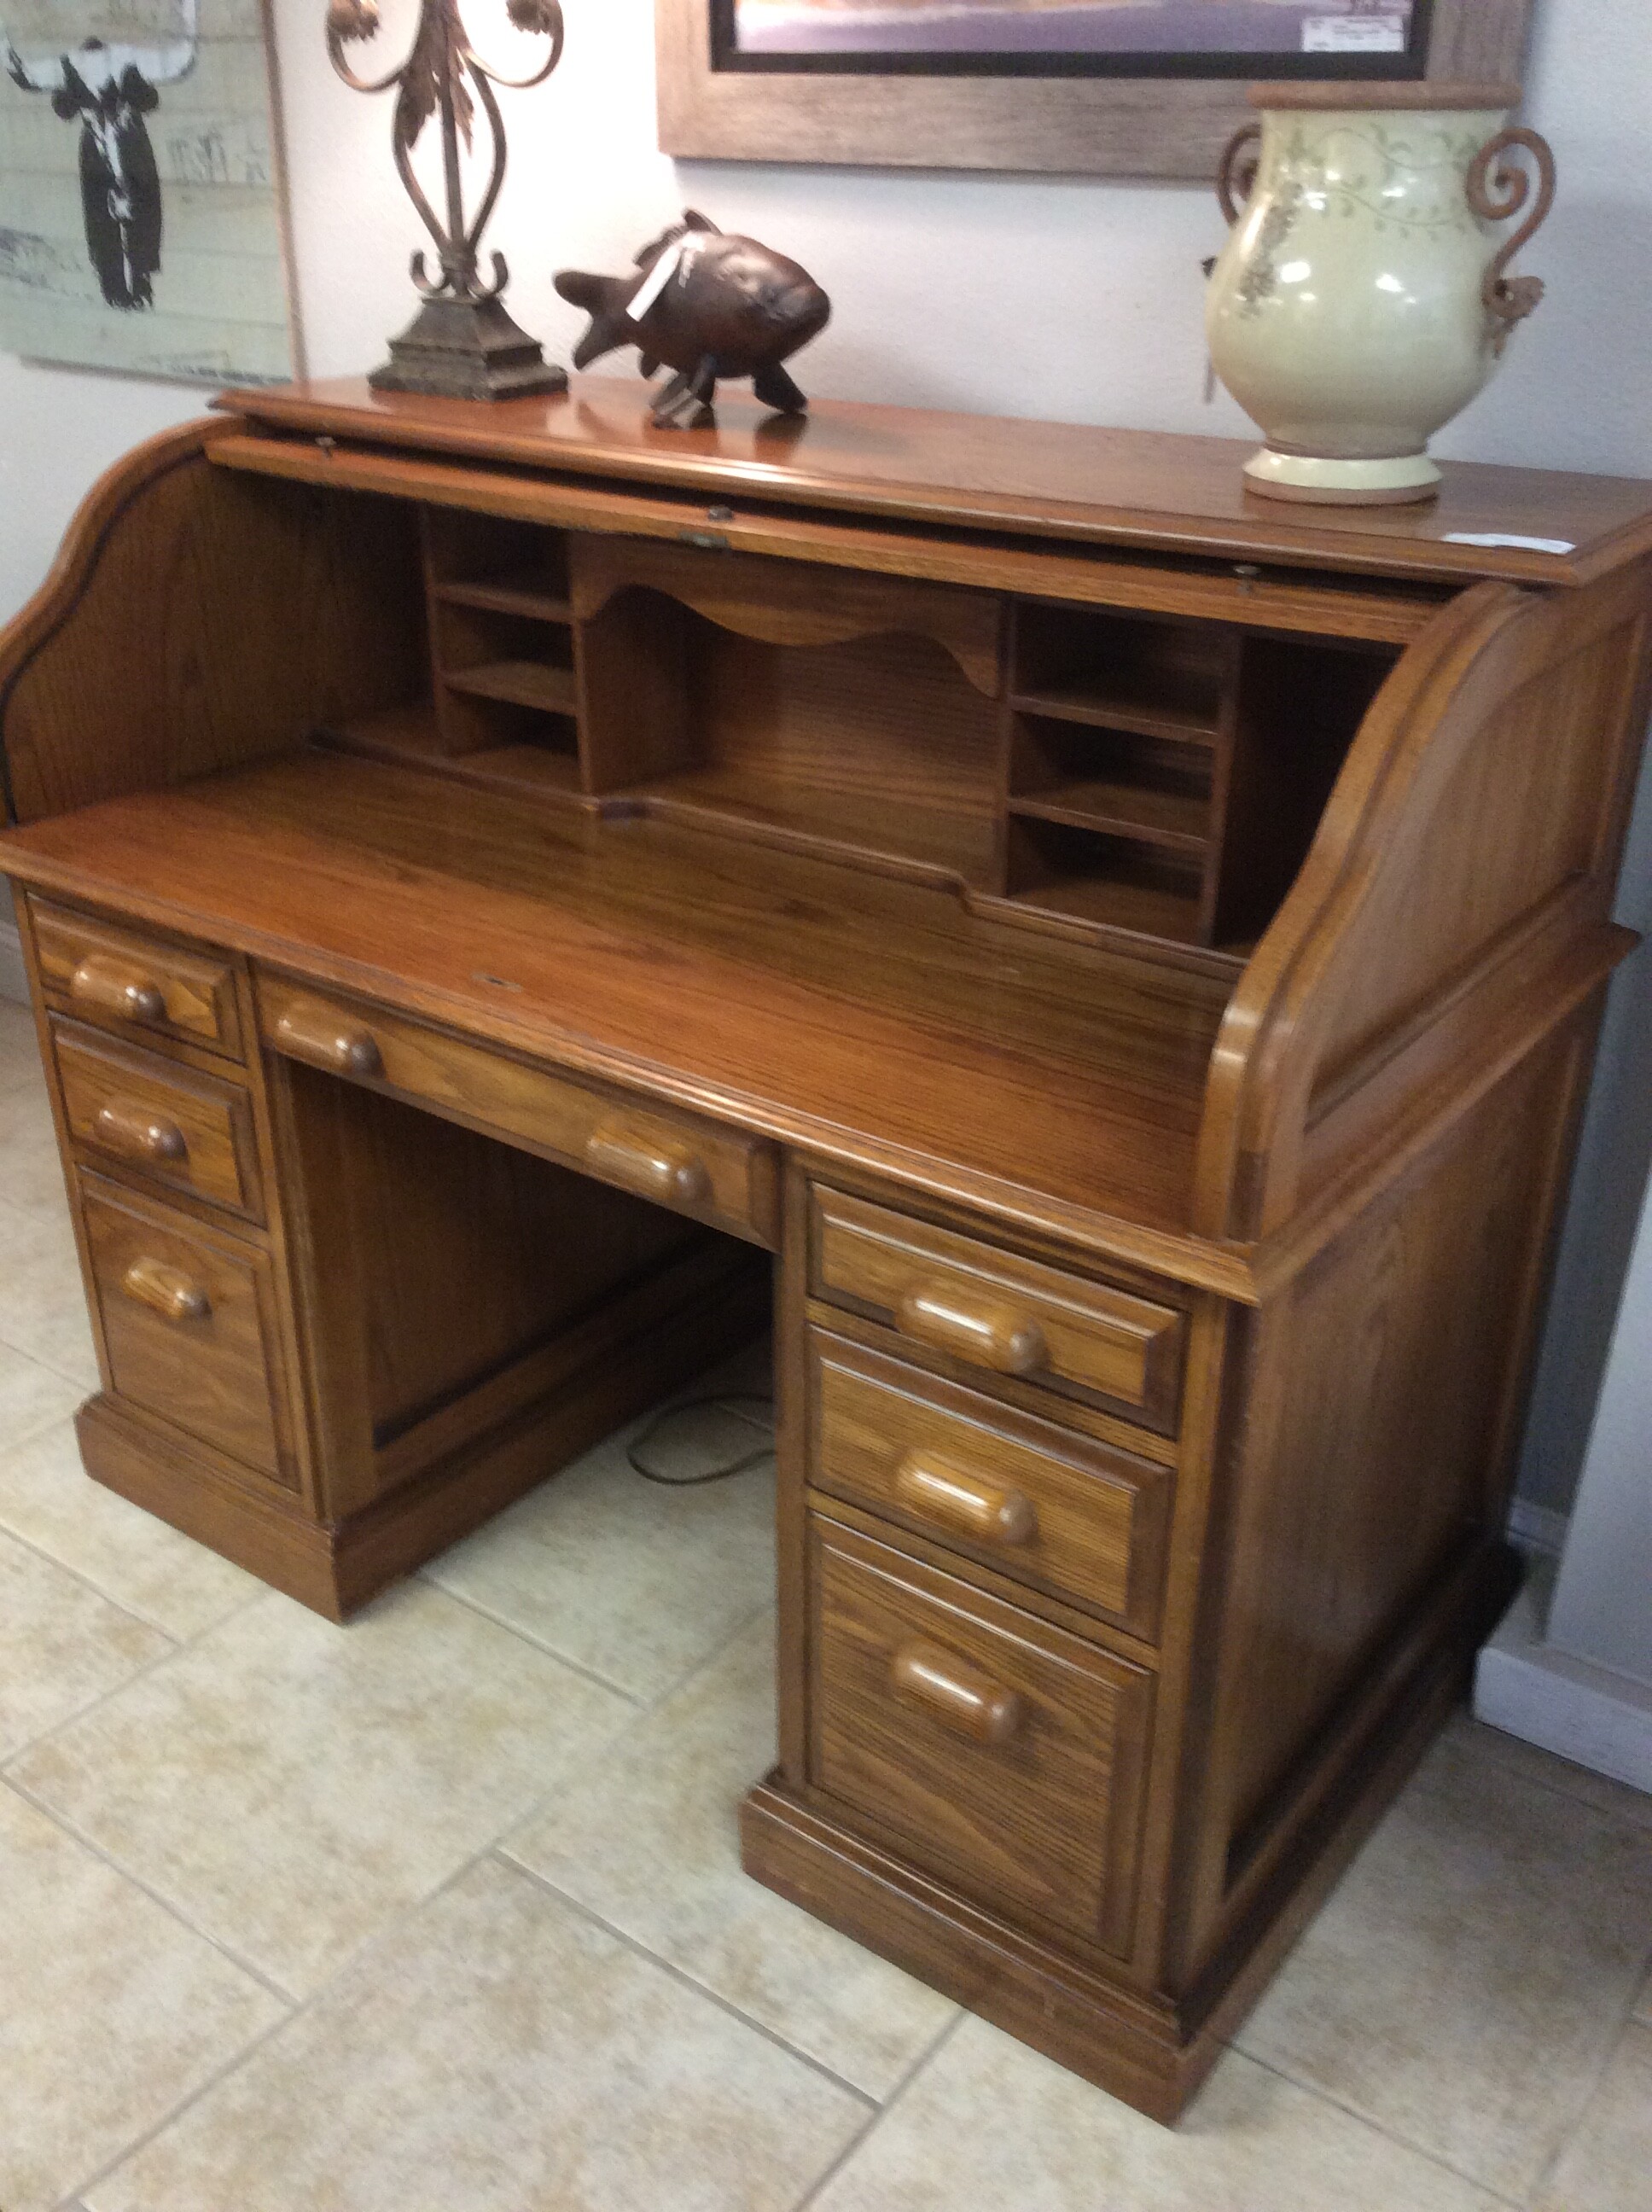 This is a beautiful Oak Rolltop desk in great condition.